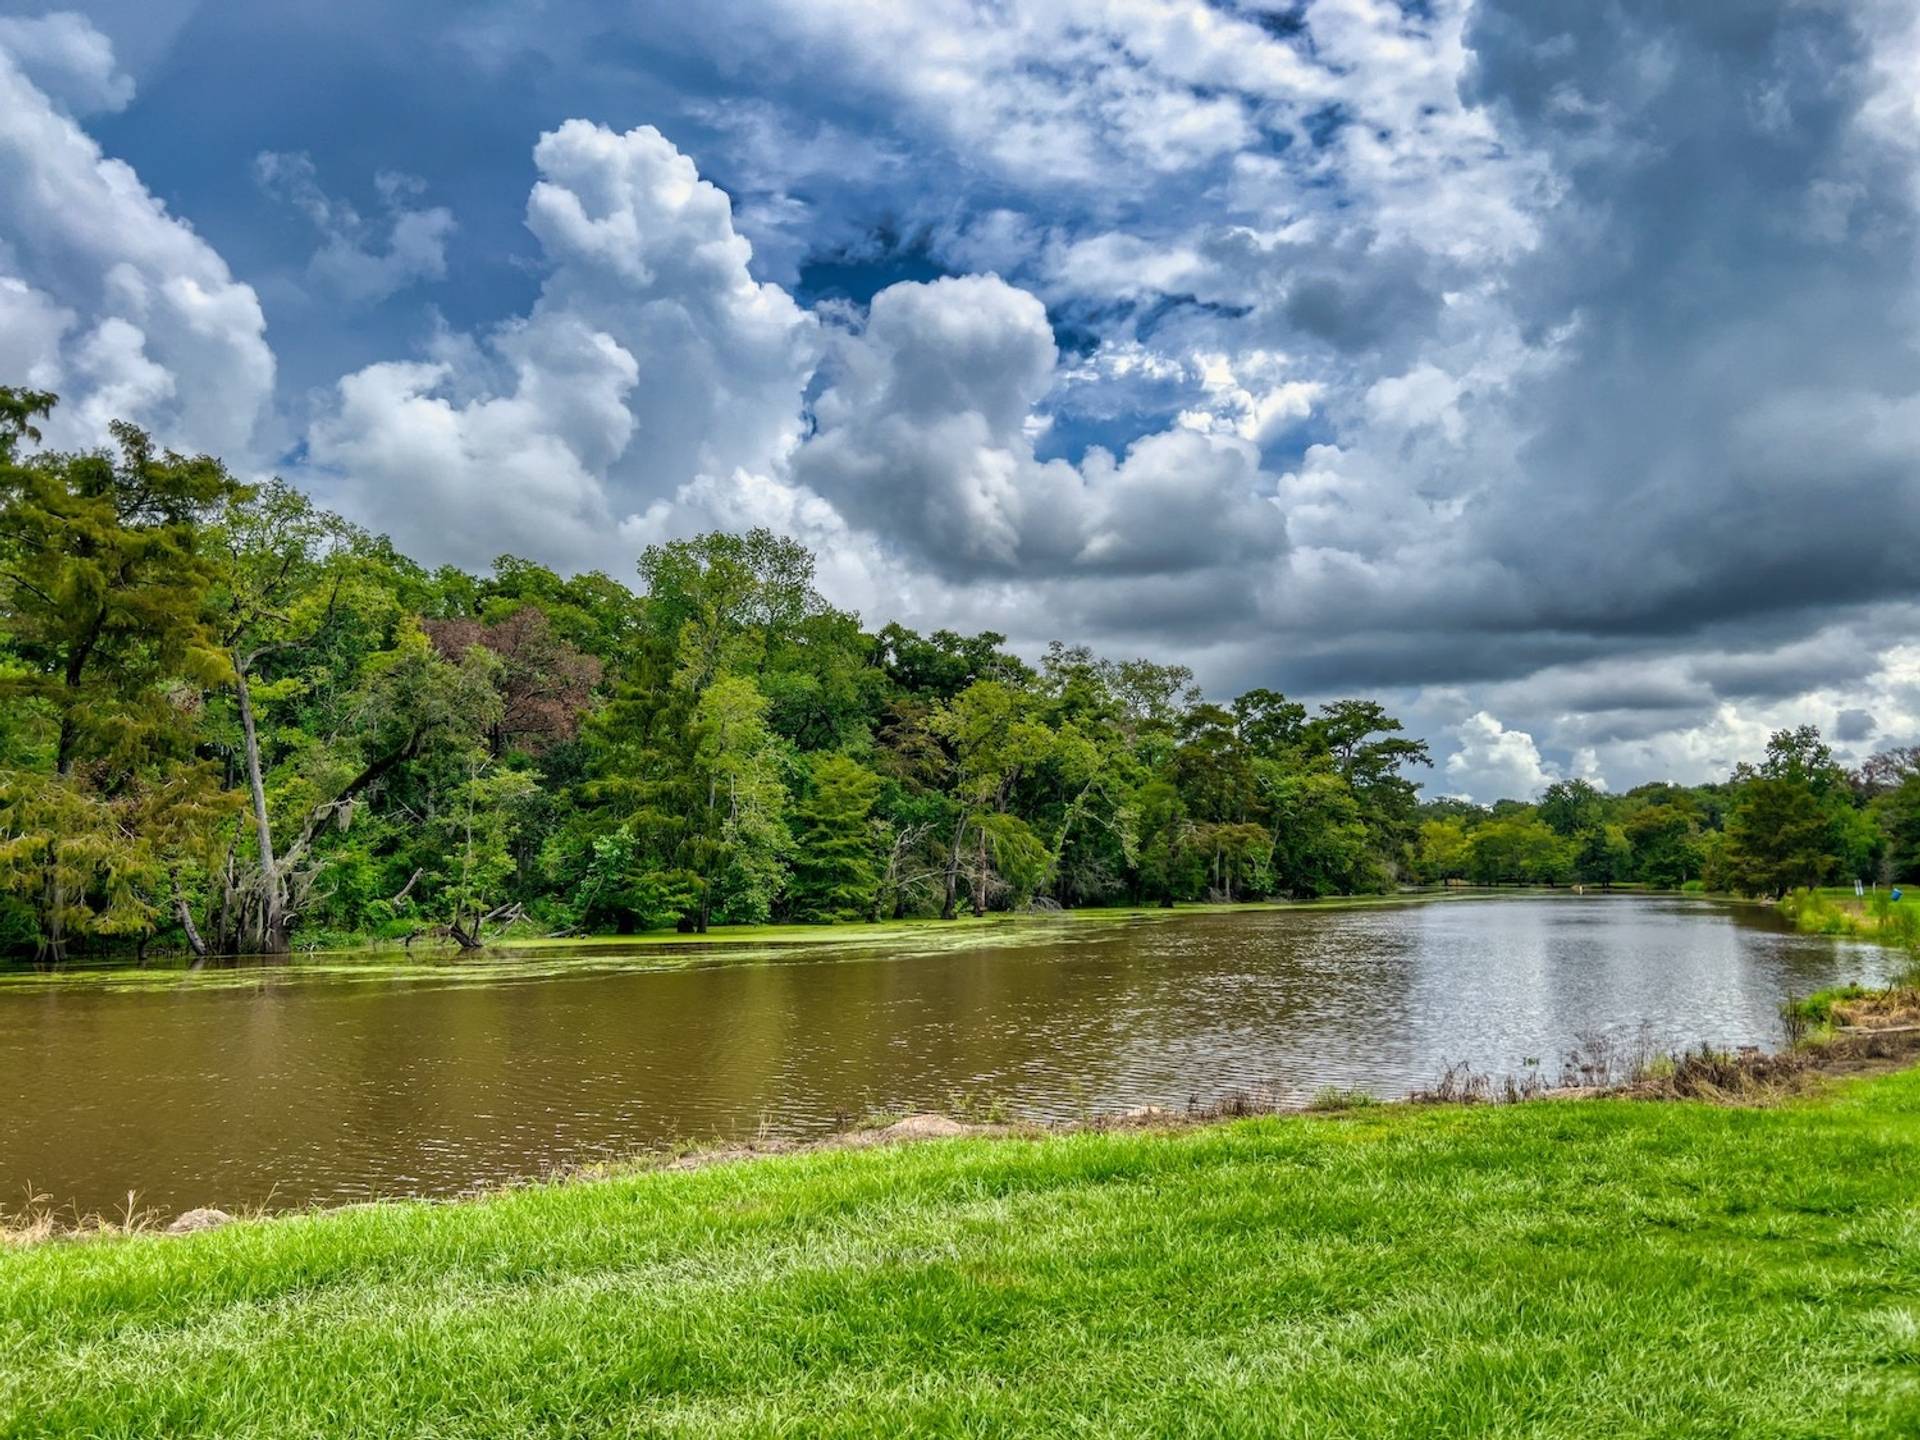 Bayou river with looming stormy sky to represent where to buy e-bikes in Louisiana